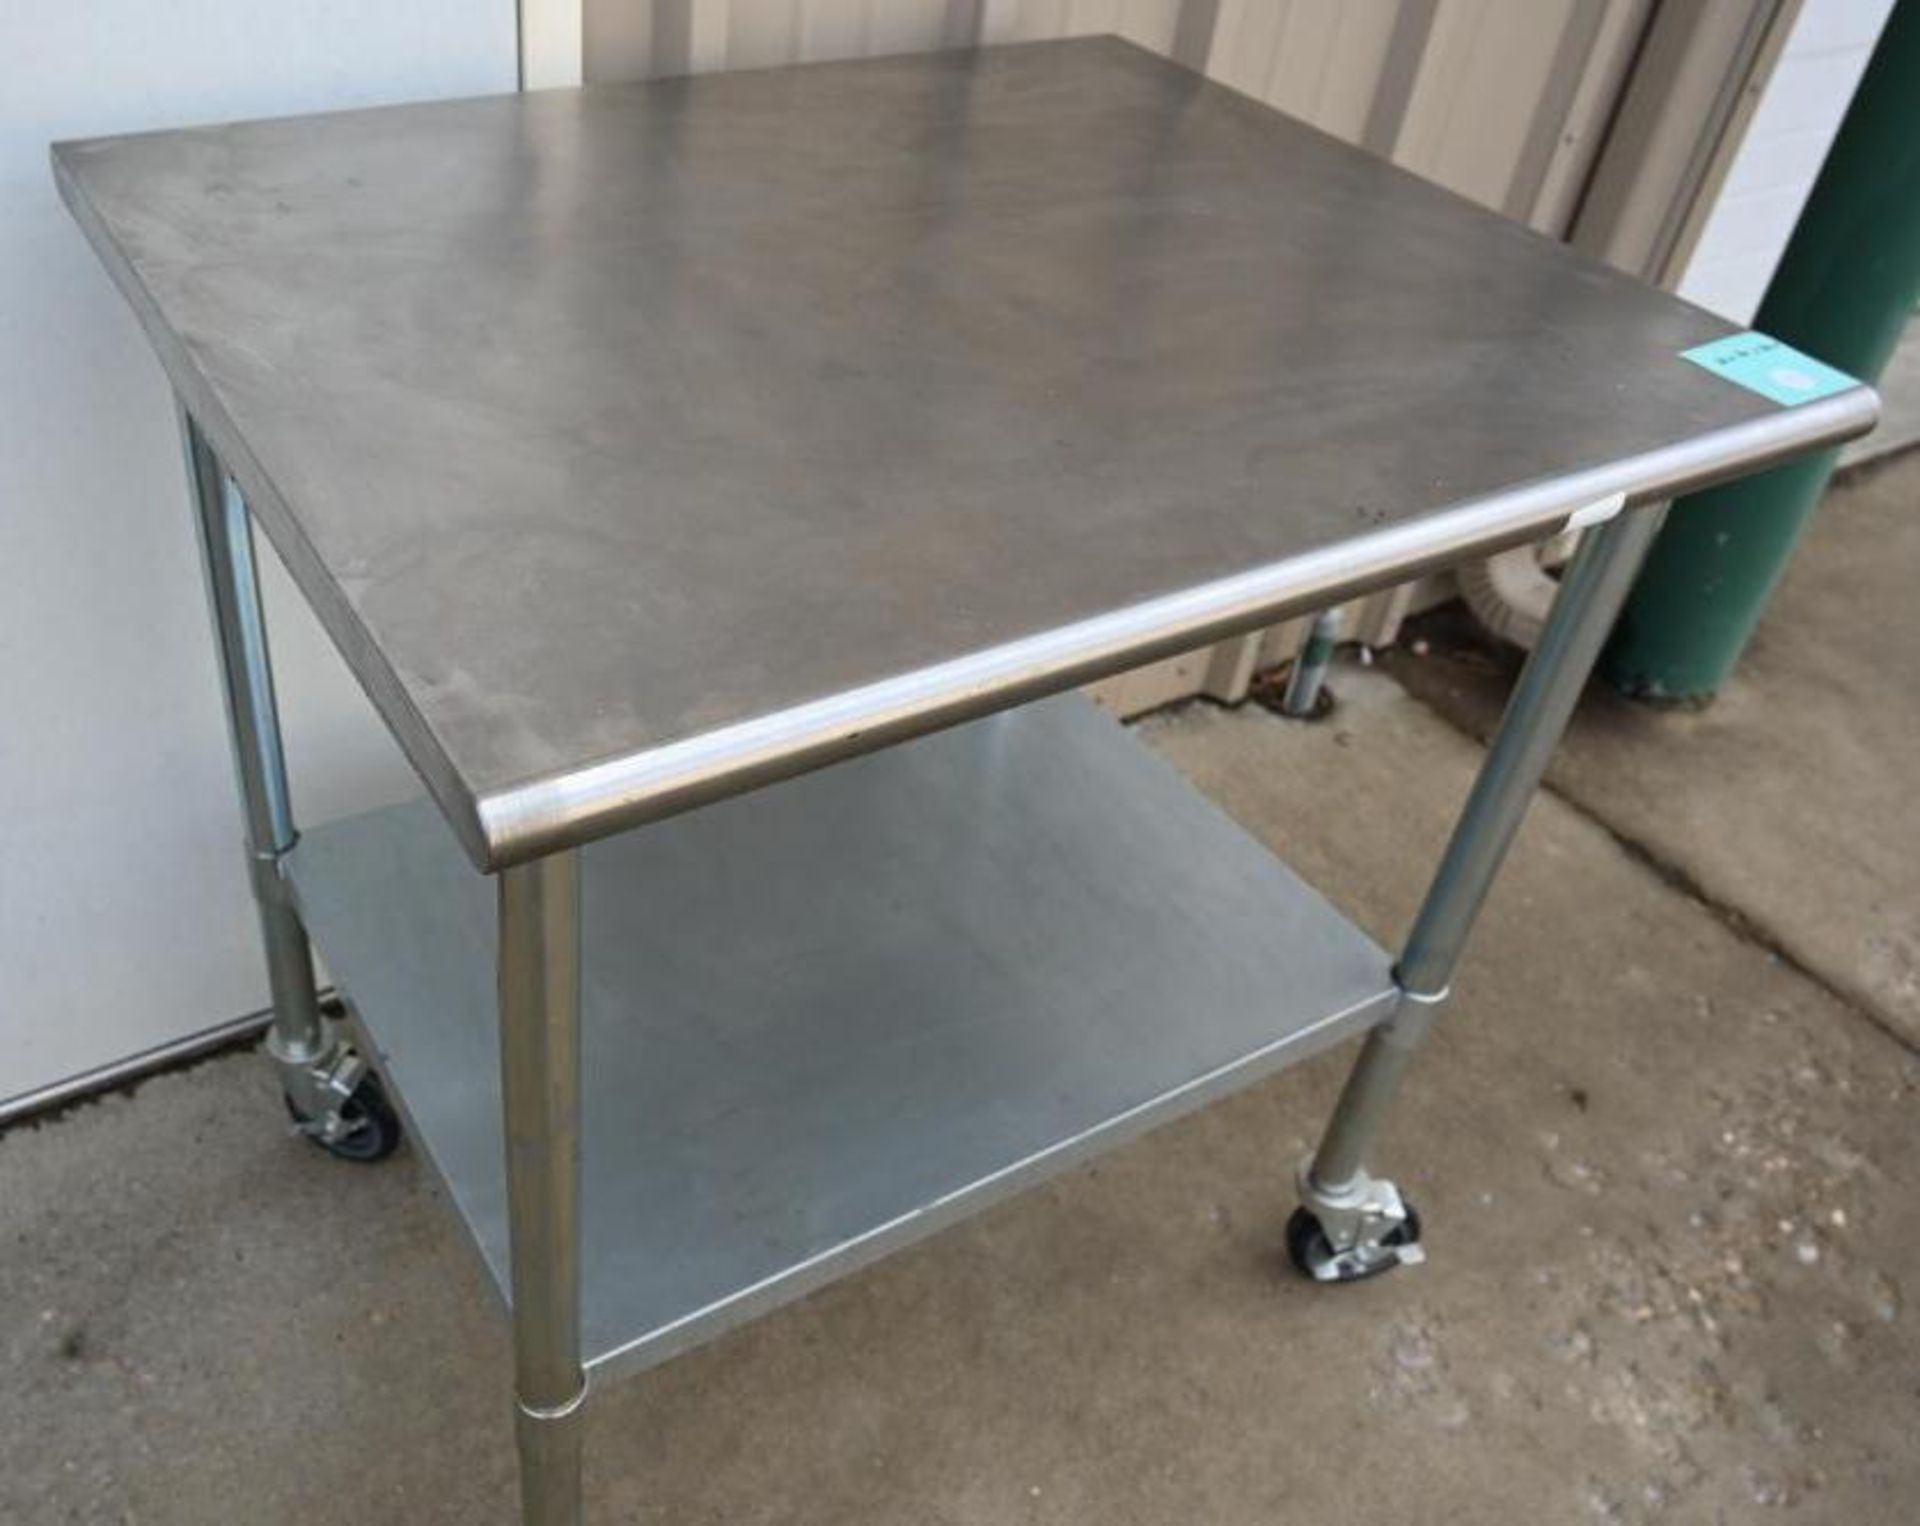 NSF Stainless Steel Work Table with Casters - Image 4 of 8